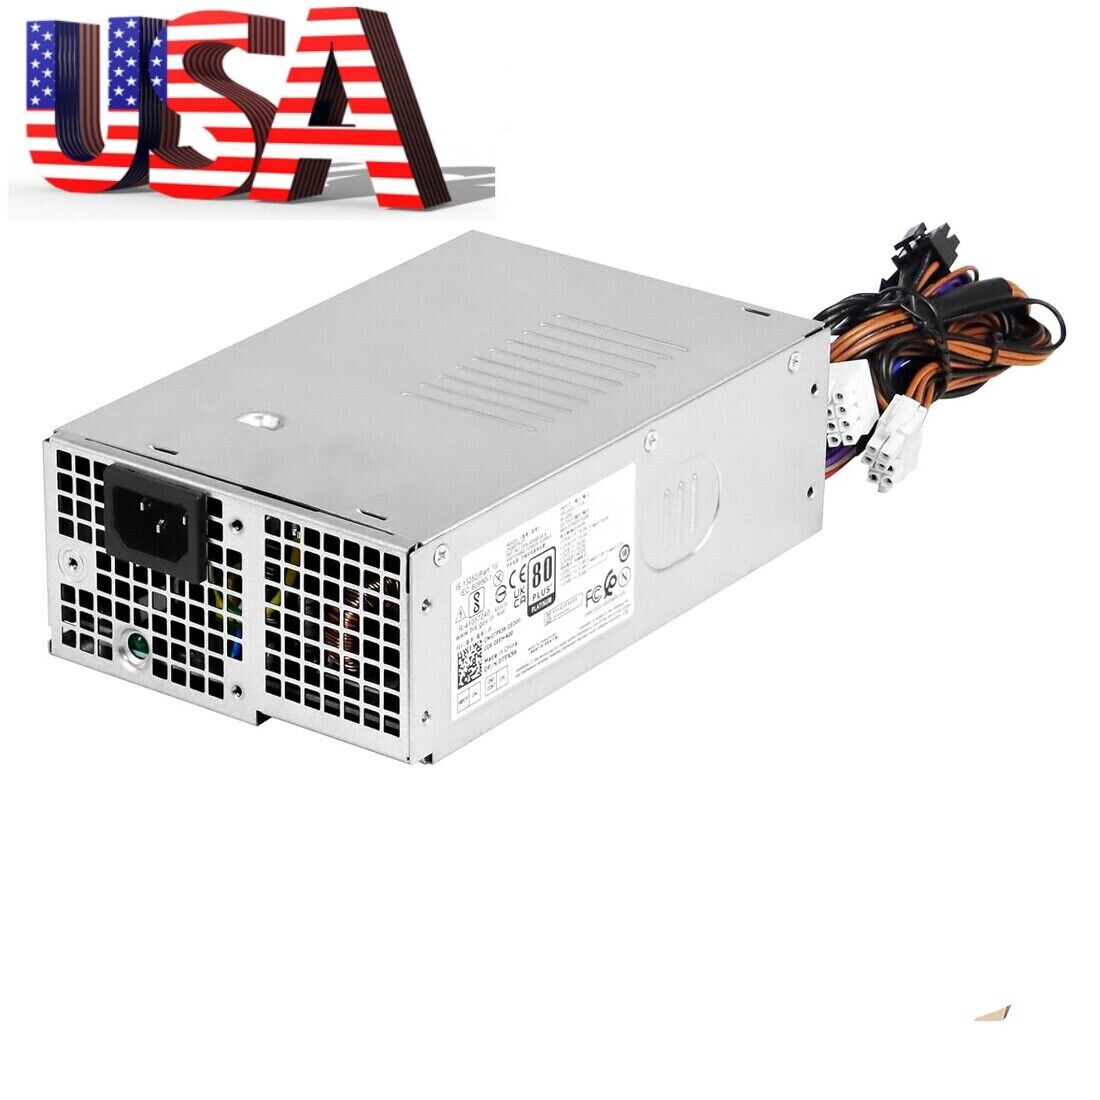 New 500W Power Supply D500EPS-01 Fits DELL Precision T3660 DYW3N TPX56 RJVH9 US